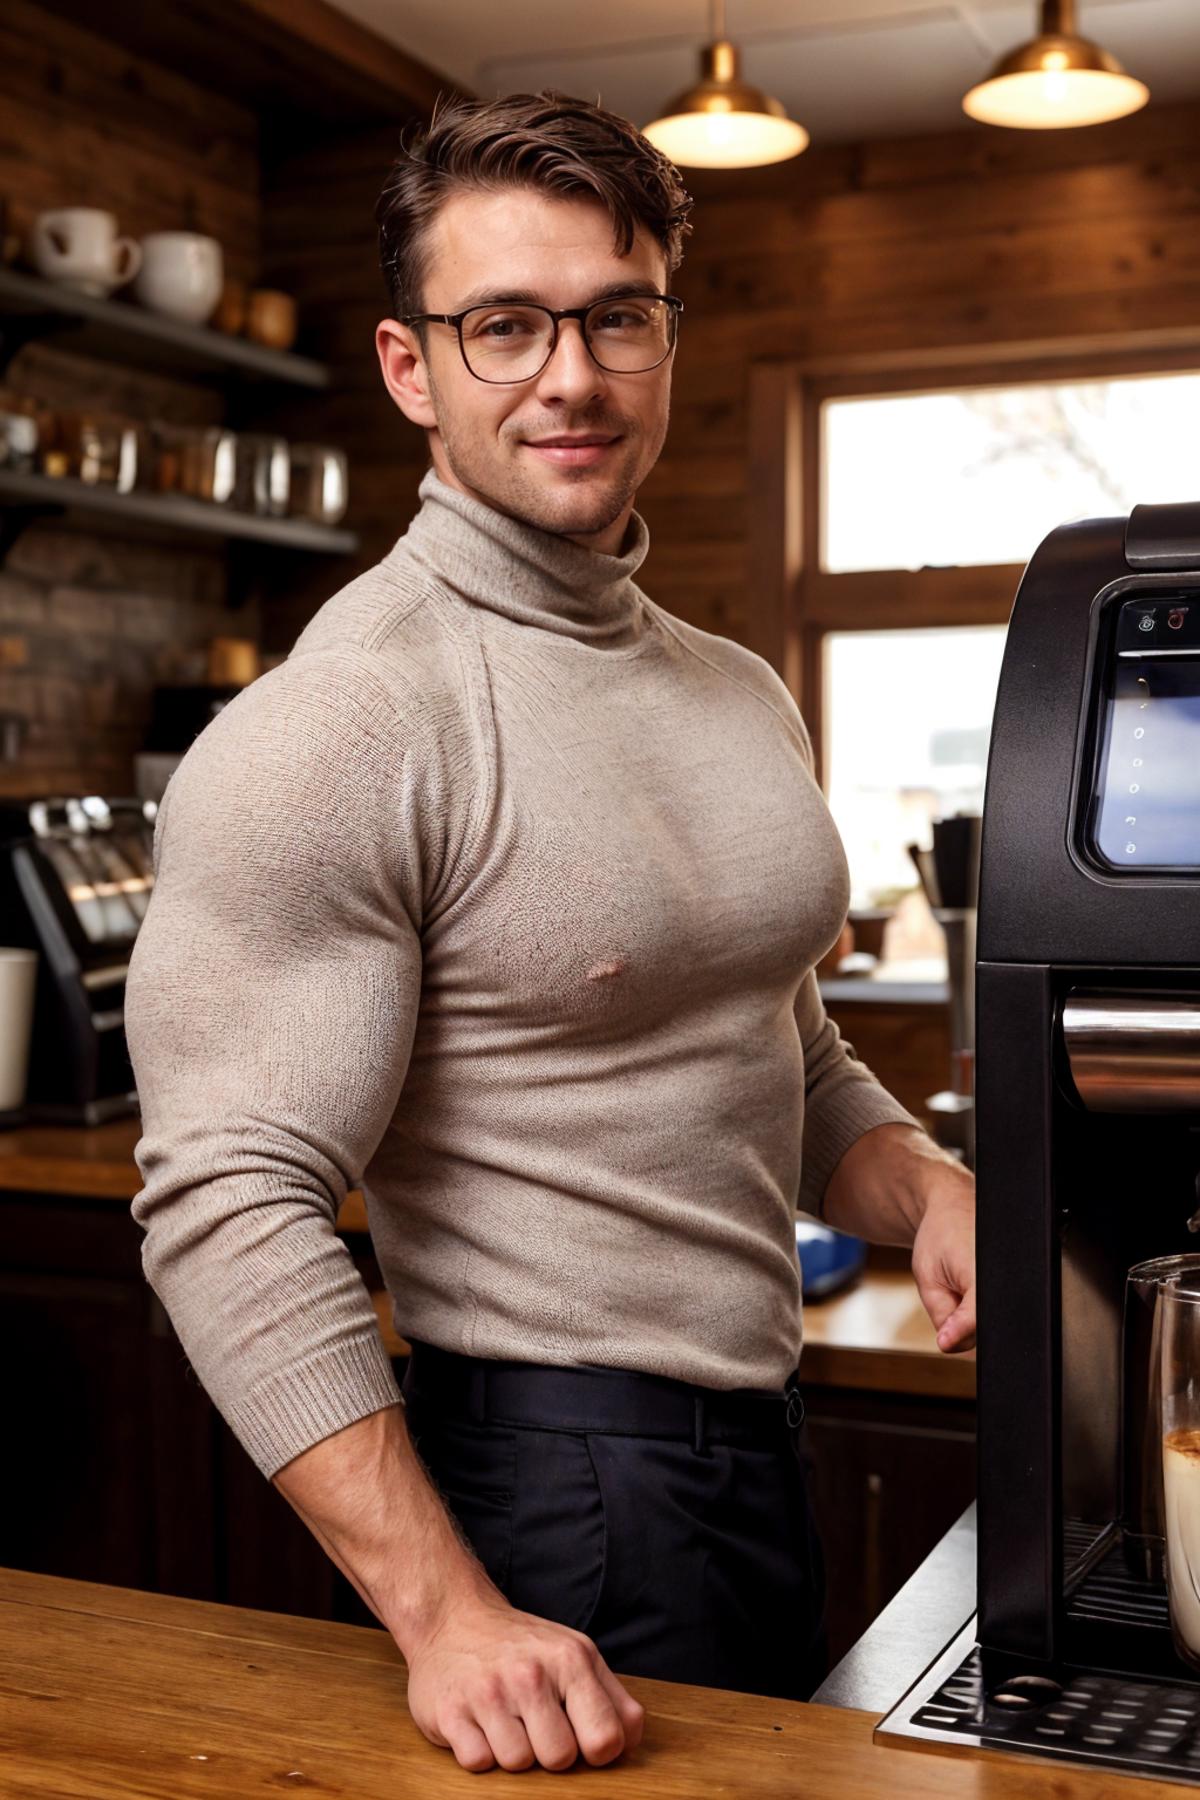 A muscular man wearing glasses and a tan sweater poses in front of a coffee maker.